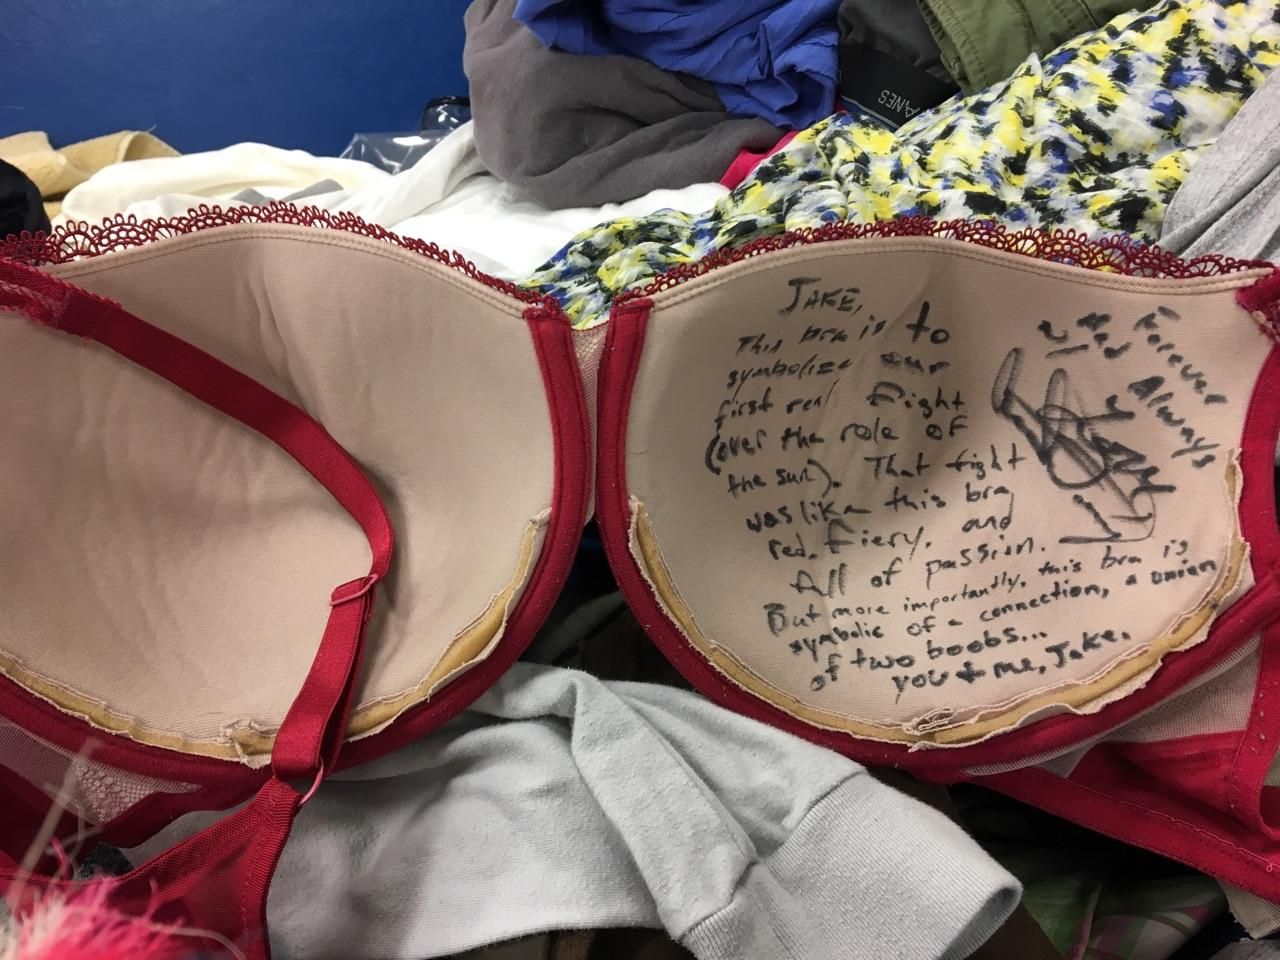 My sister found this bra at Goodwill